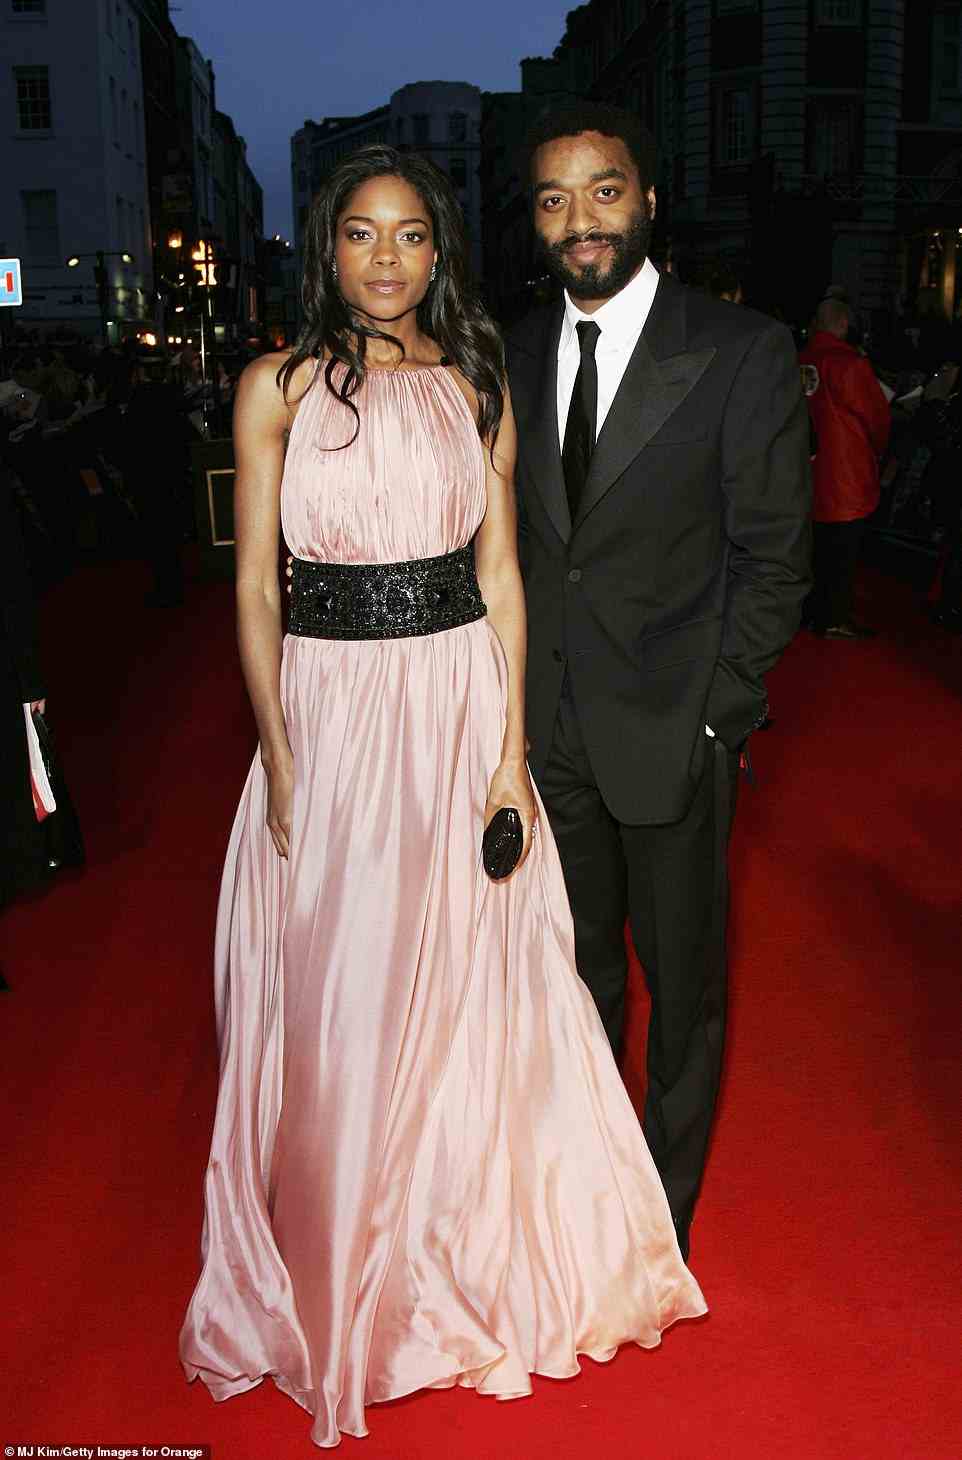 Not faking chemistry! The No Time to Die actress was reportedly in a seven-year relationship with her co-star Chiwetel Ejiofor (R, pictured in 2007) until 2007, but it must have ended amicably enough for them to work together